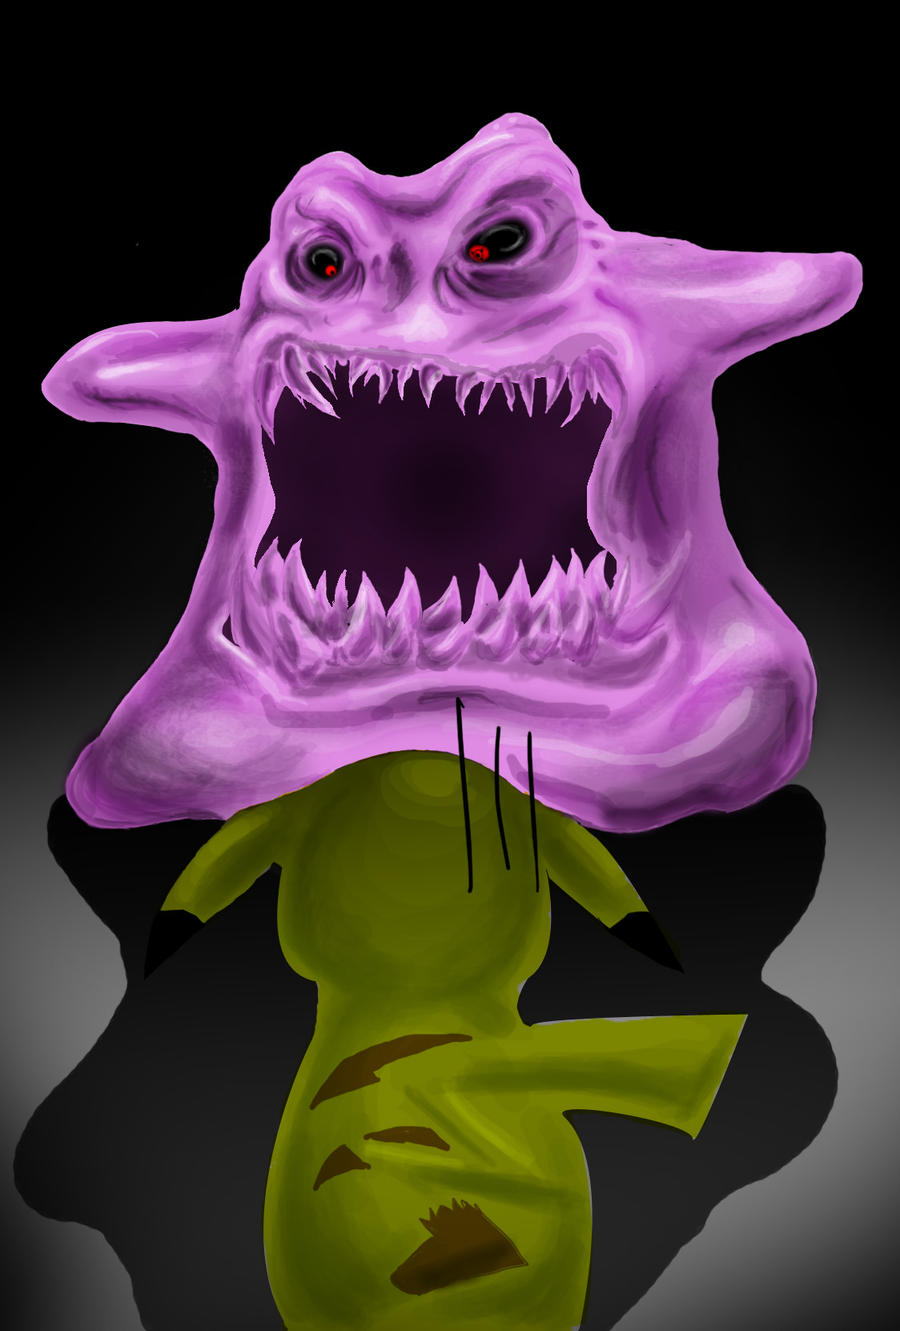 Dittos Scary Face by DrakeStirLawl on DeviantArt